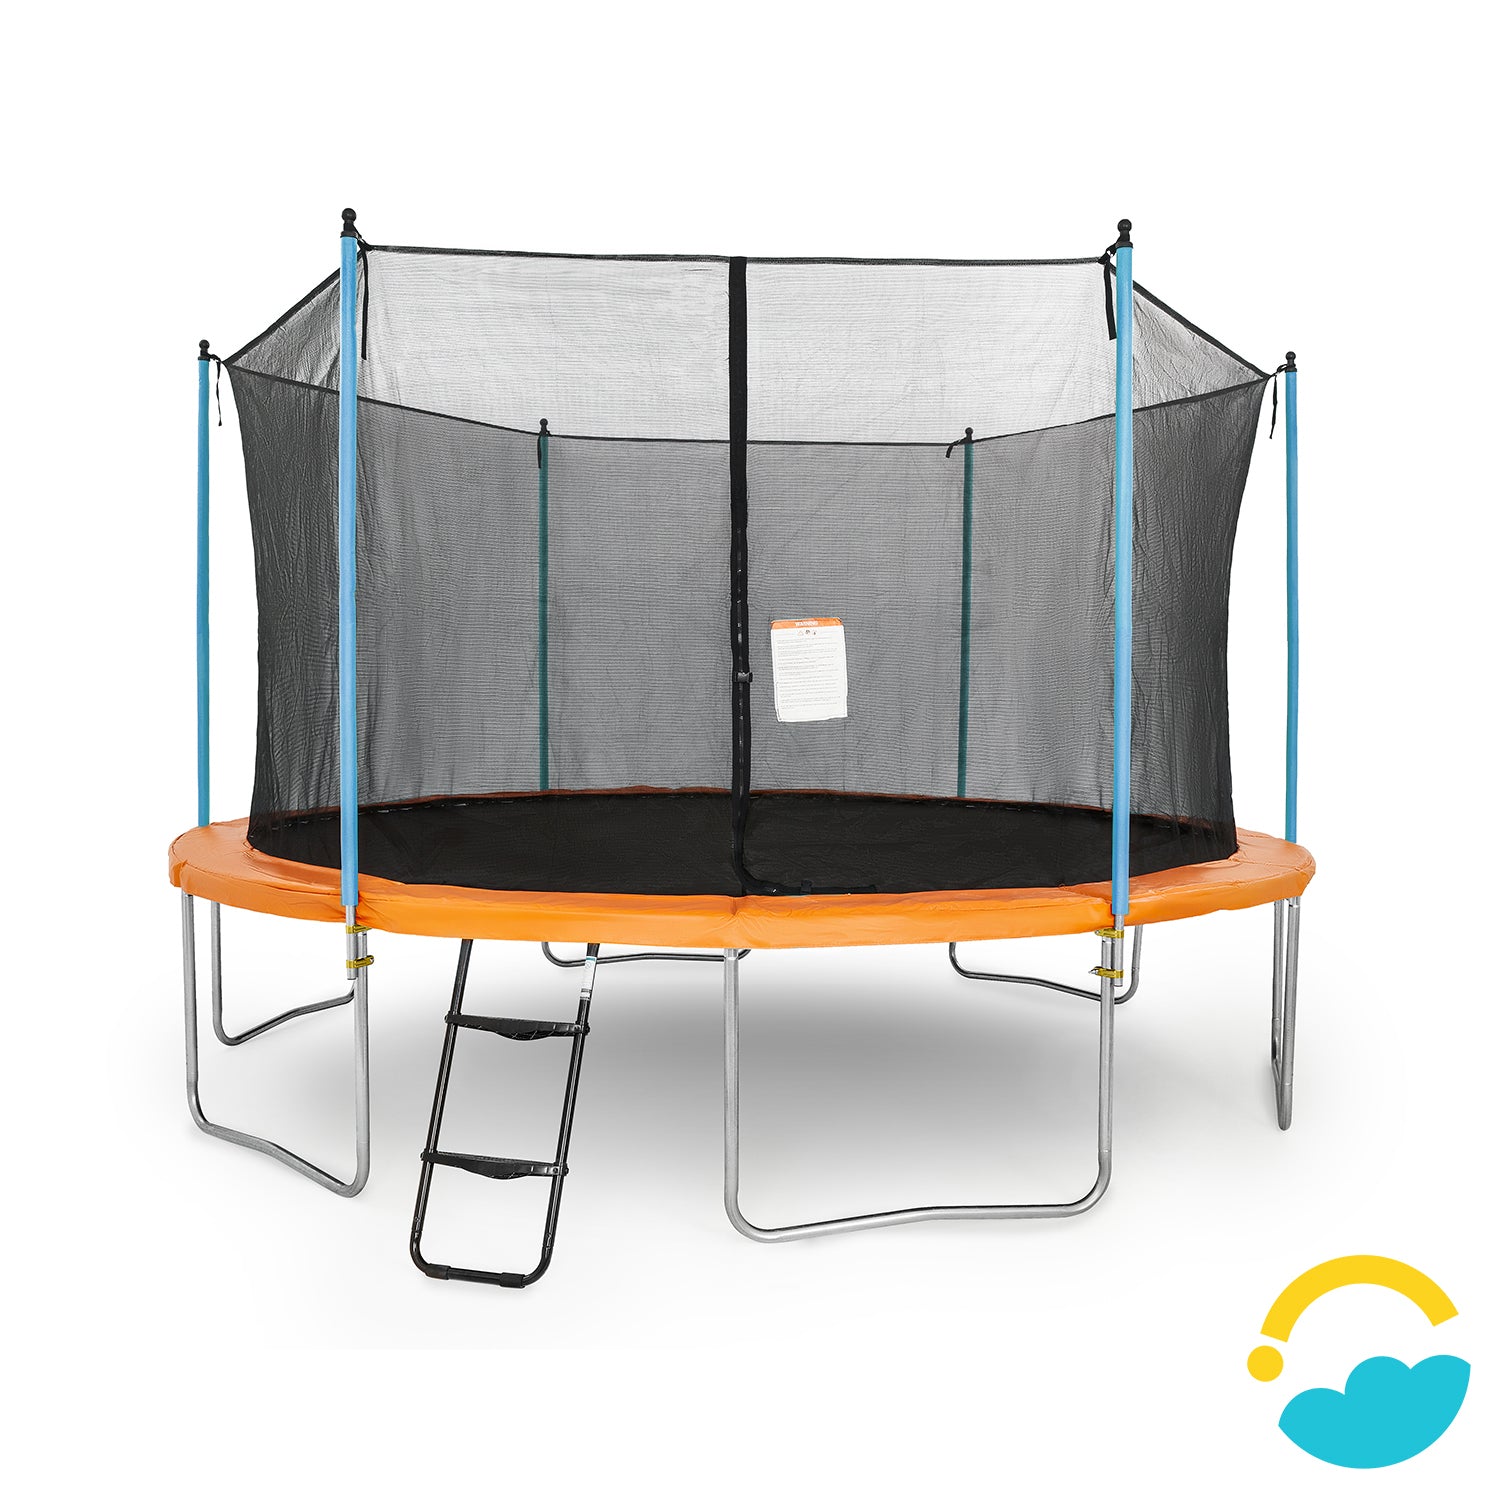 Image of Enclosure Poles connected to Trampoline.